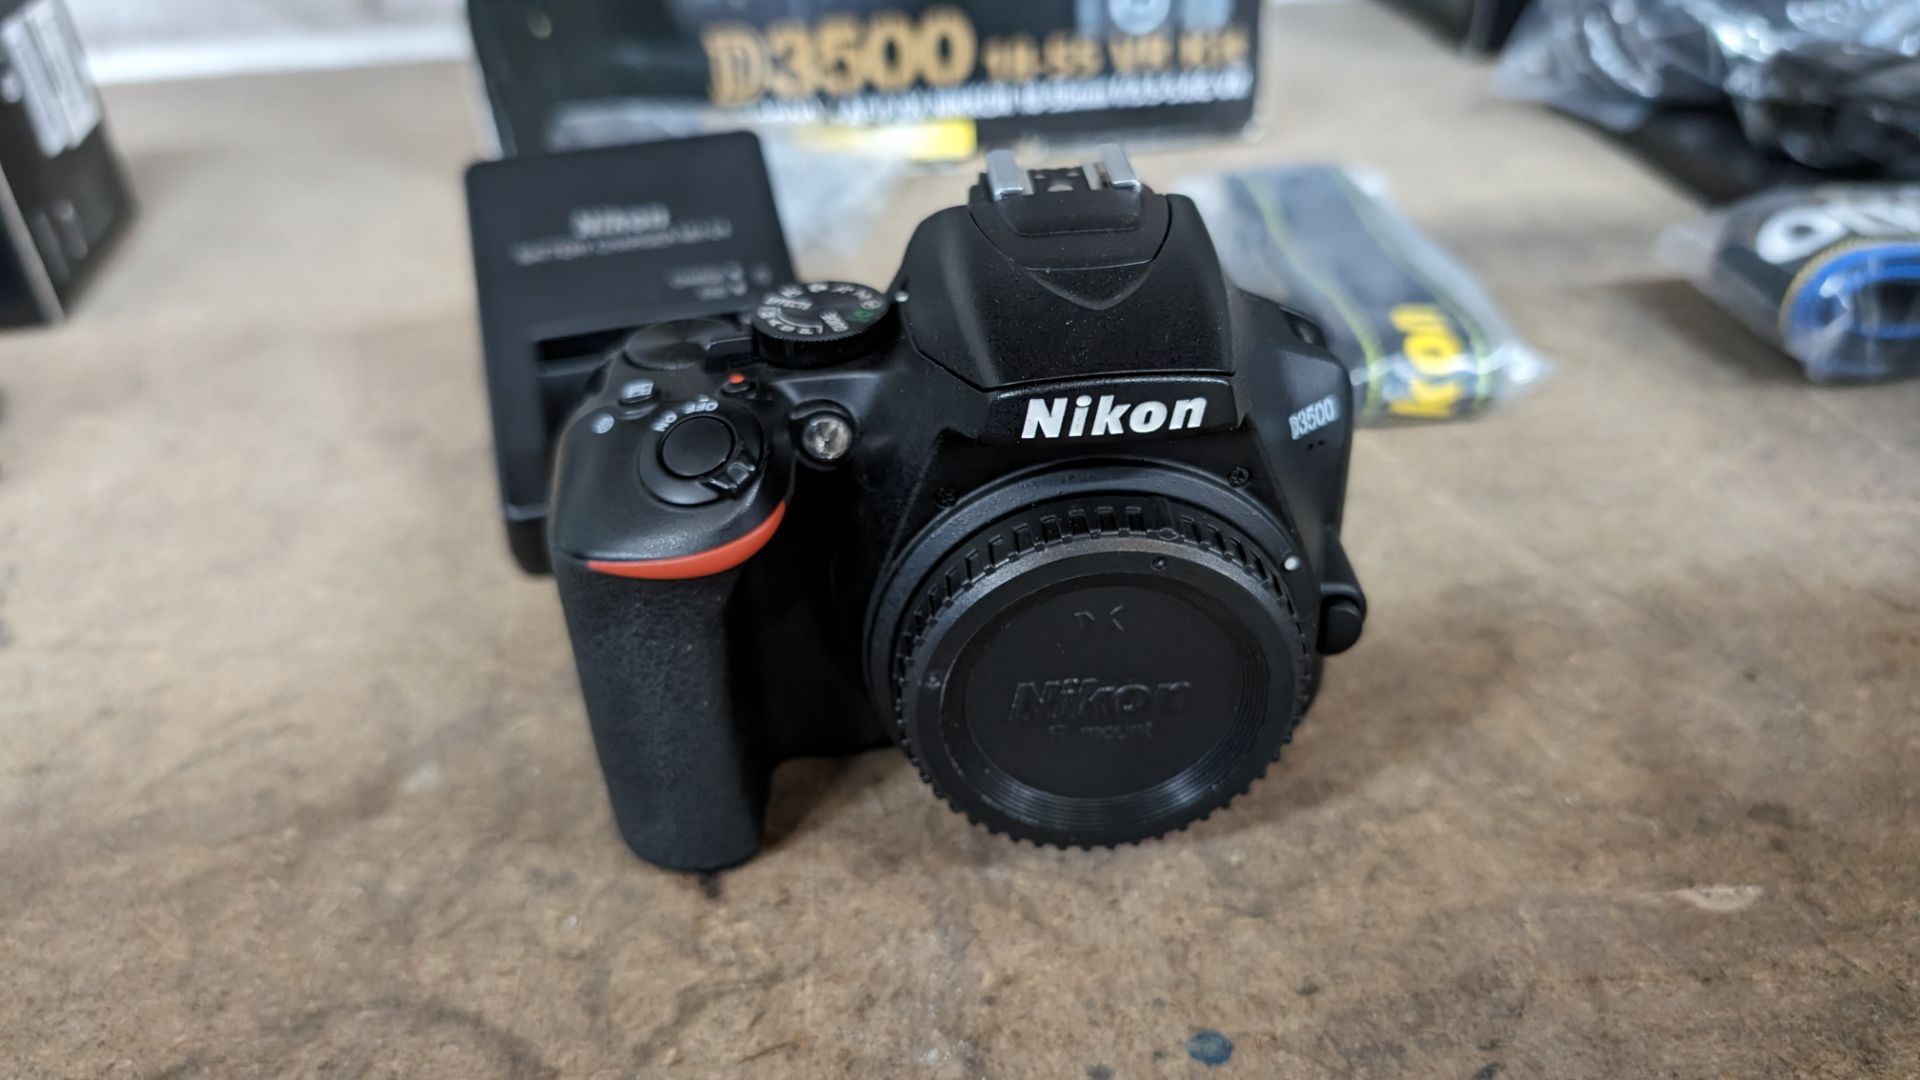 Nikon D3500 camera. Although this camera is in a box for a kit including a lens, this lot just comp